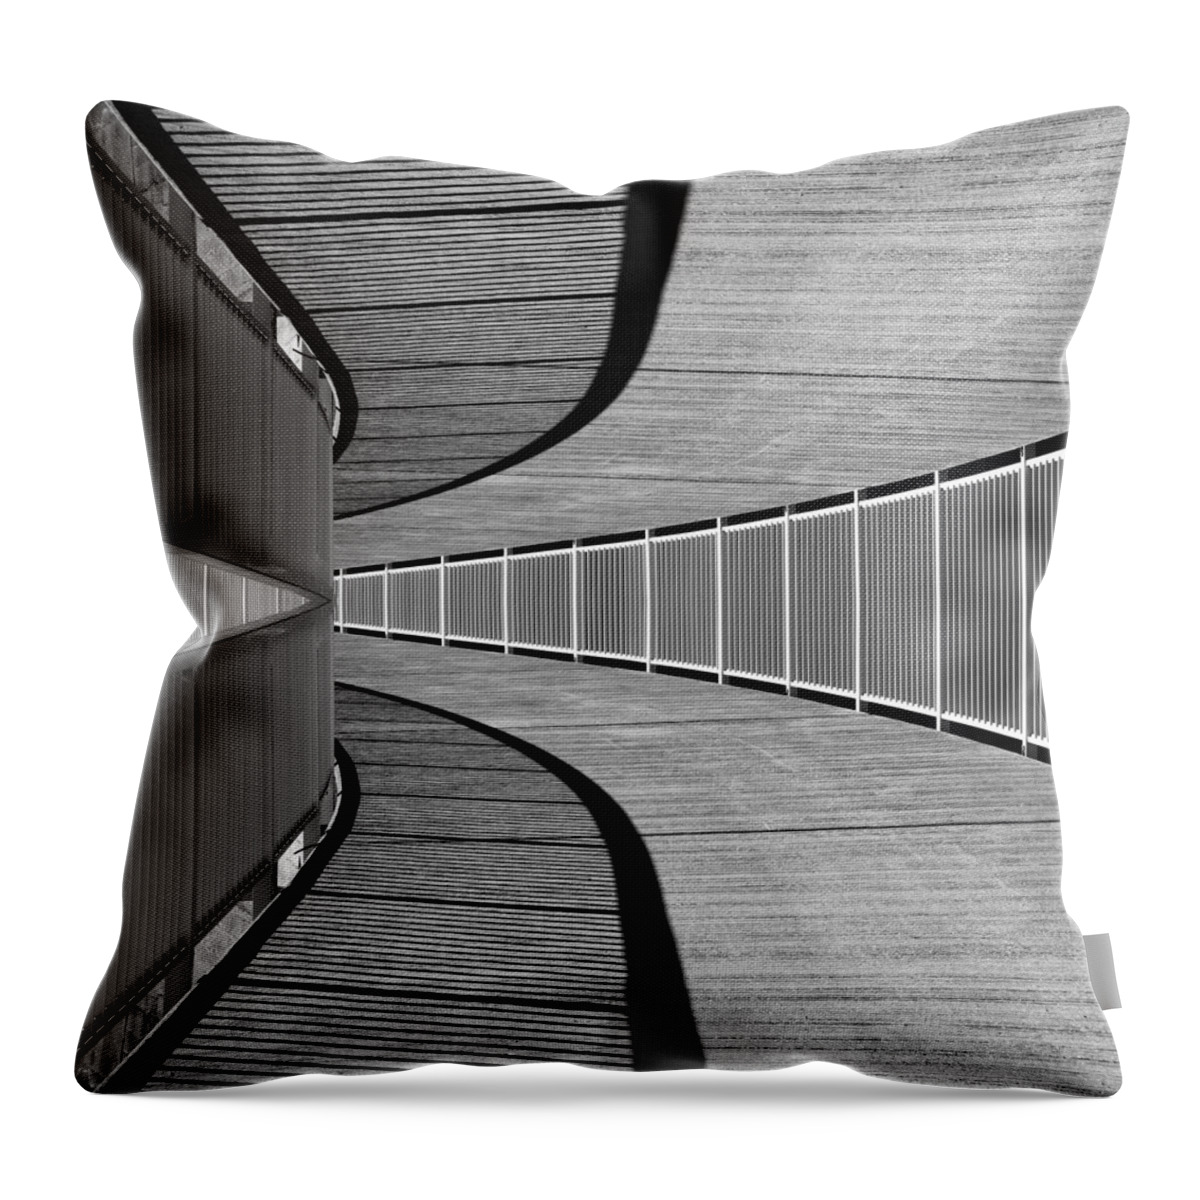 Gangway Throw Pillow featuring the photograph Gangway by Chevy Fleet